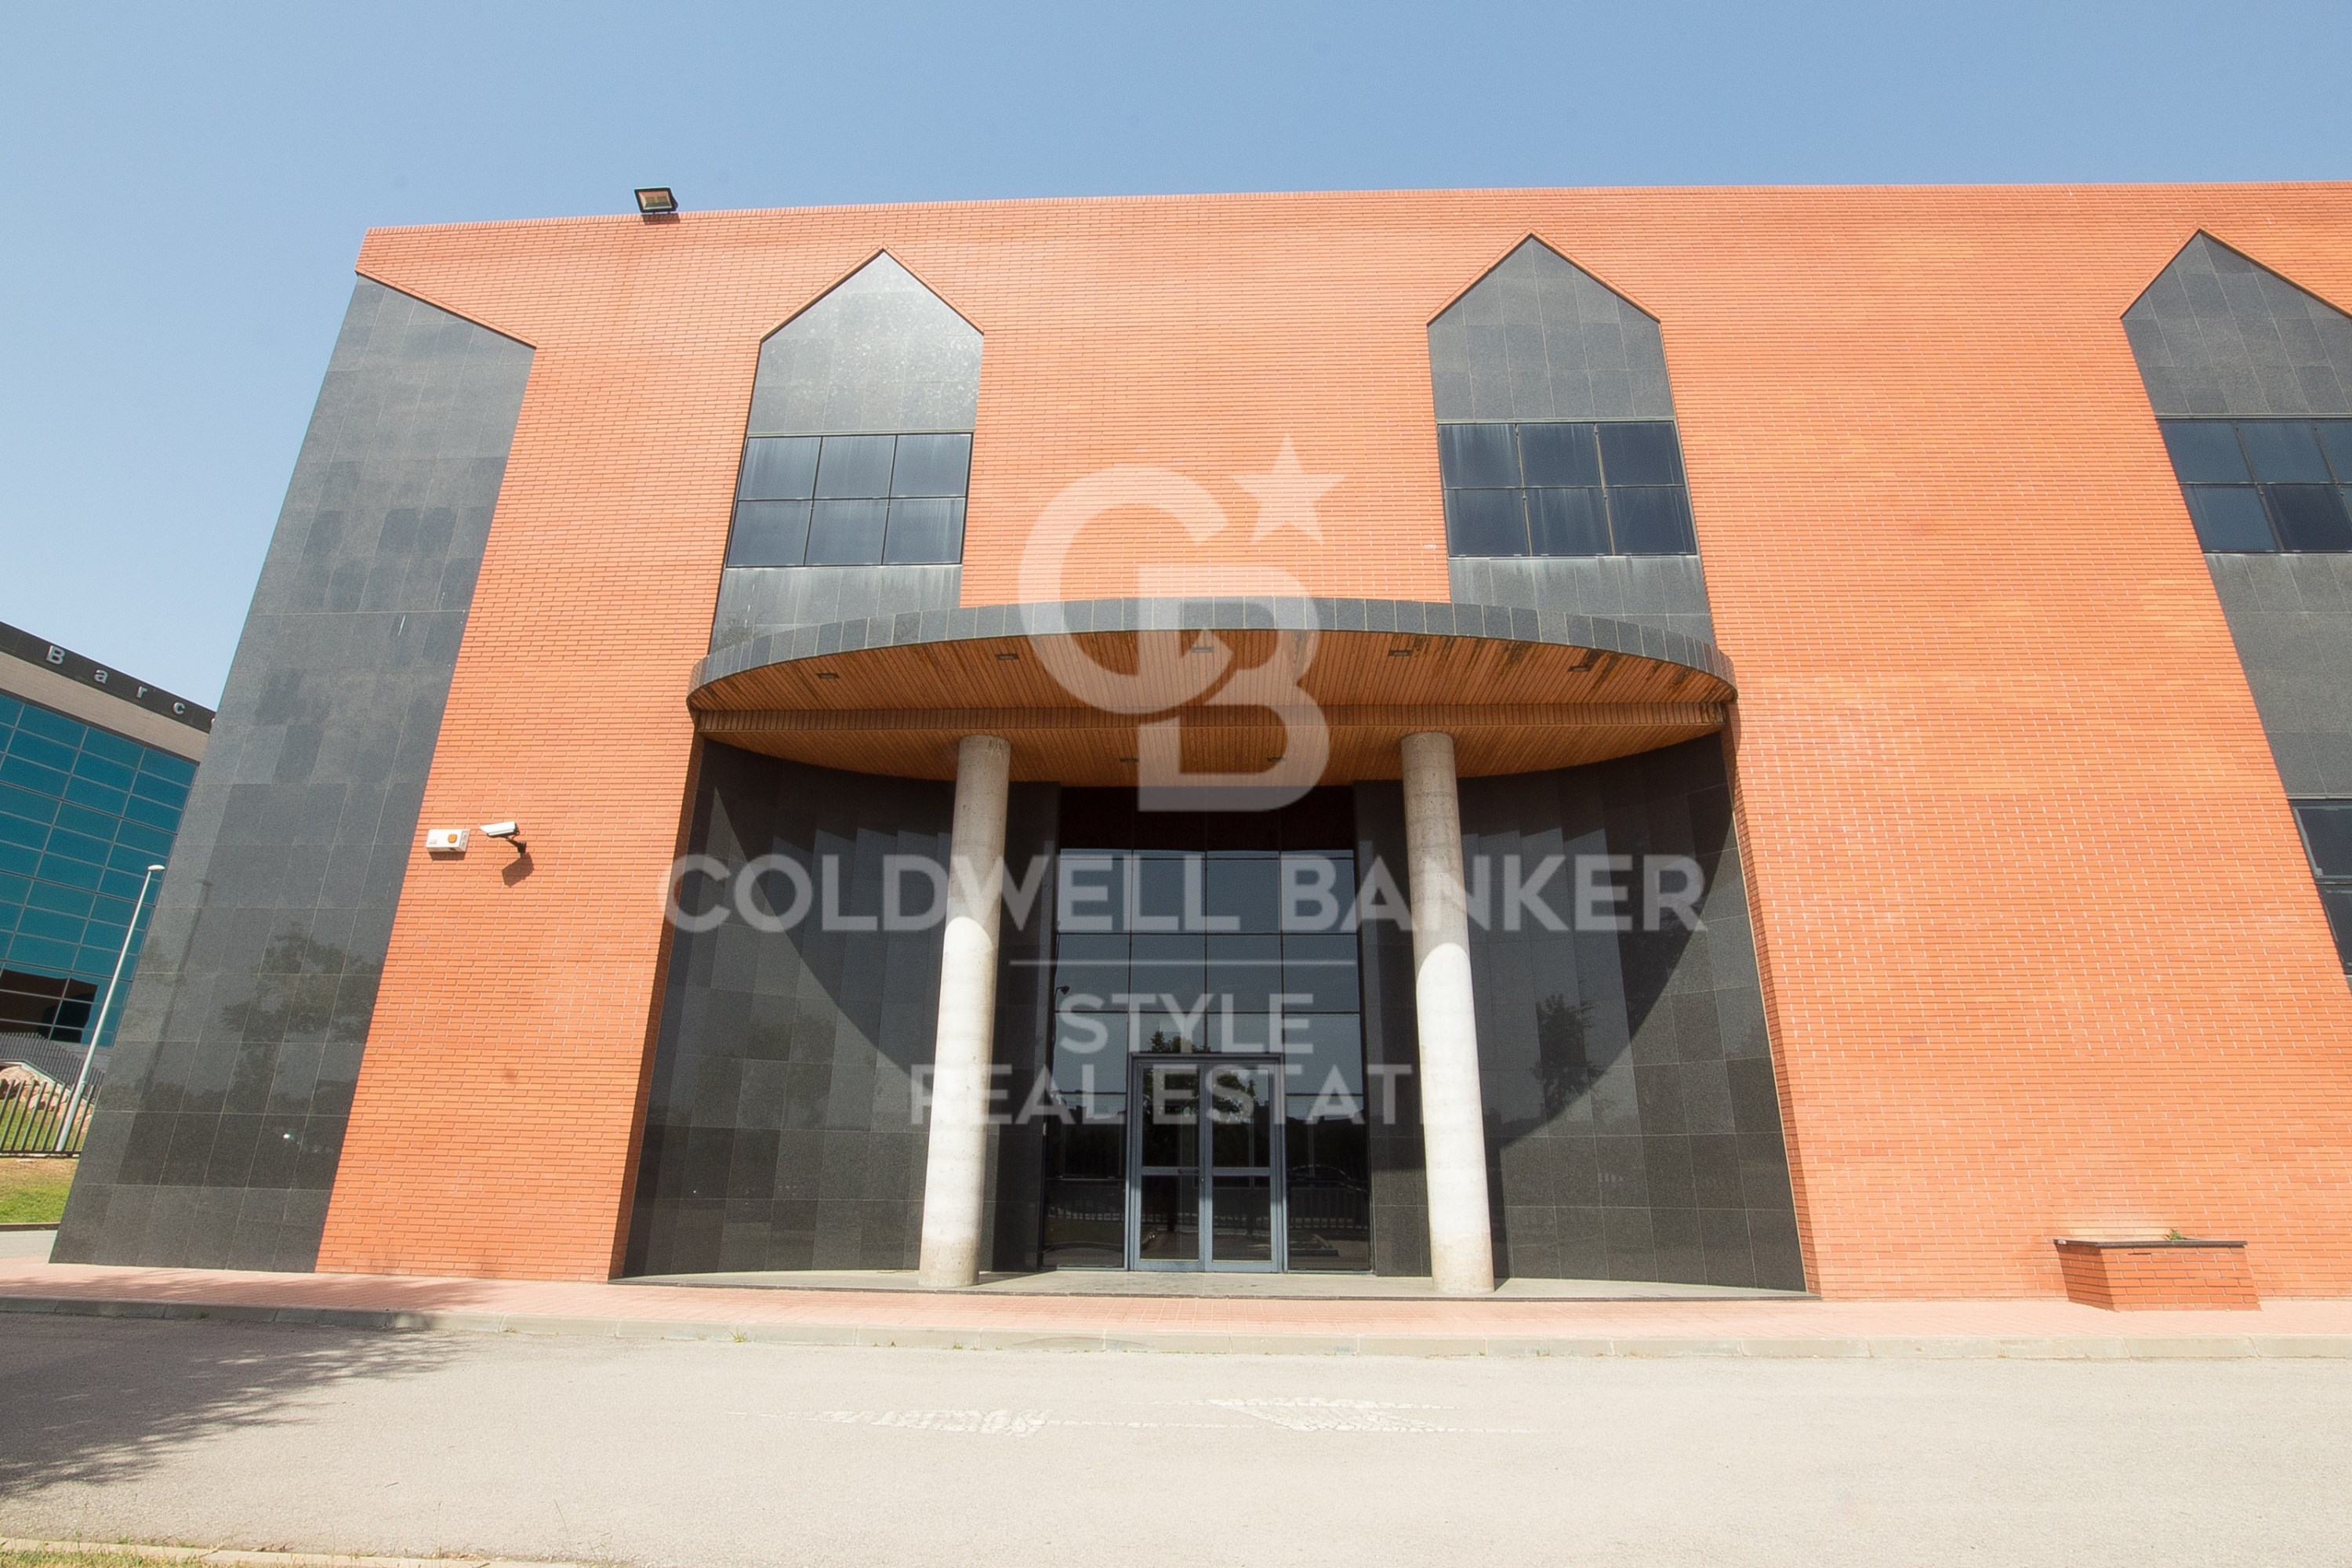 Warehouse with excellent connectivity and corporate image in Sant Quirze Del Vallès